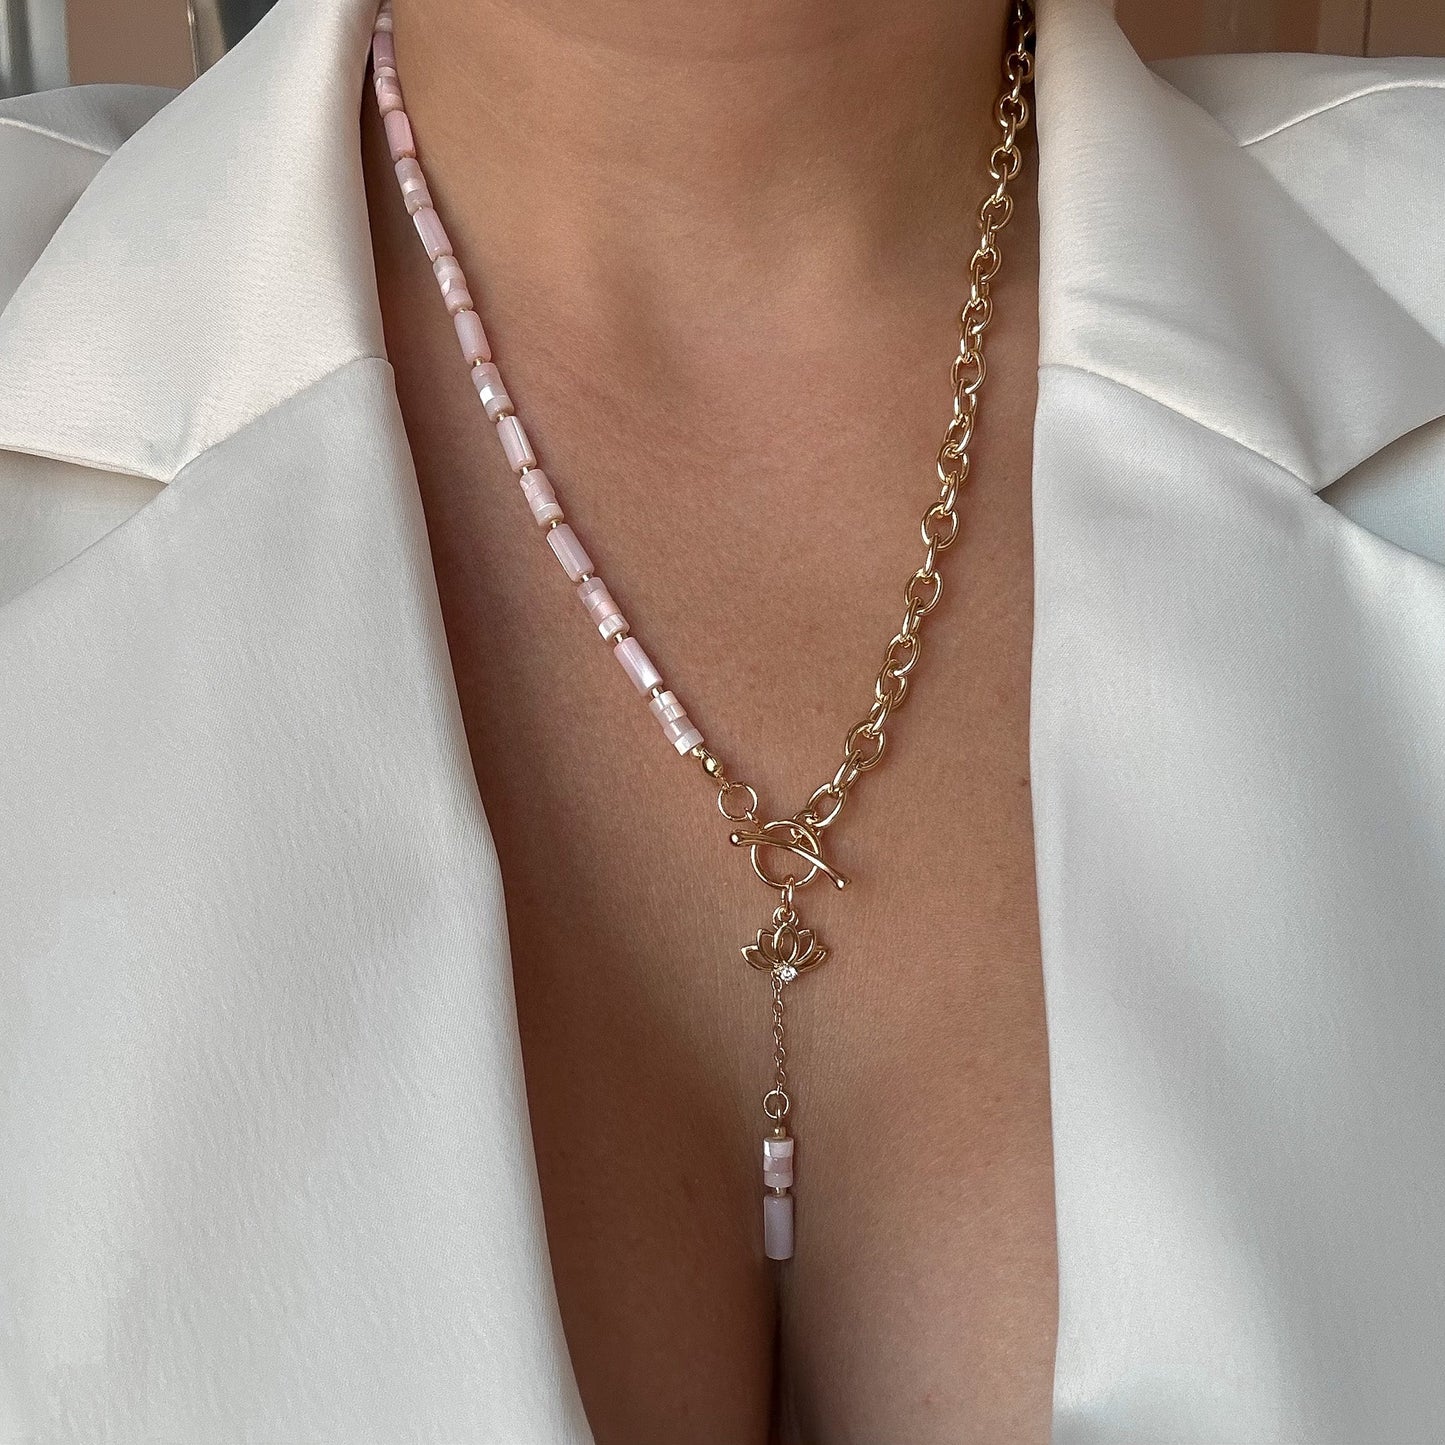 Mother-of-pearl & chain necklace